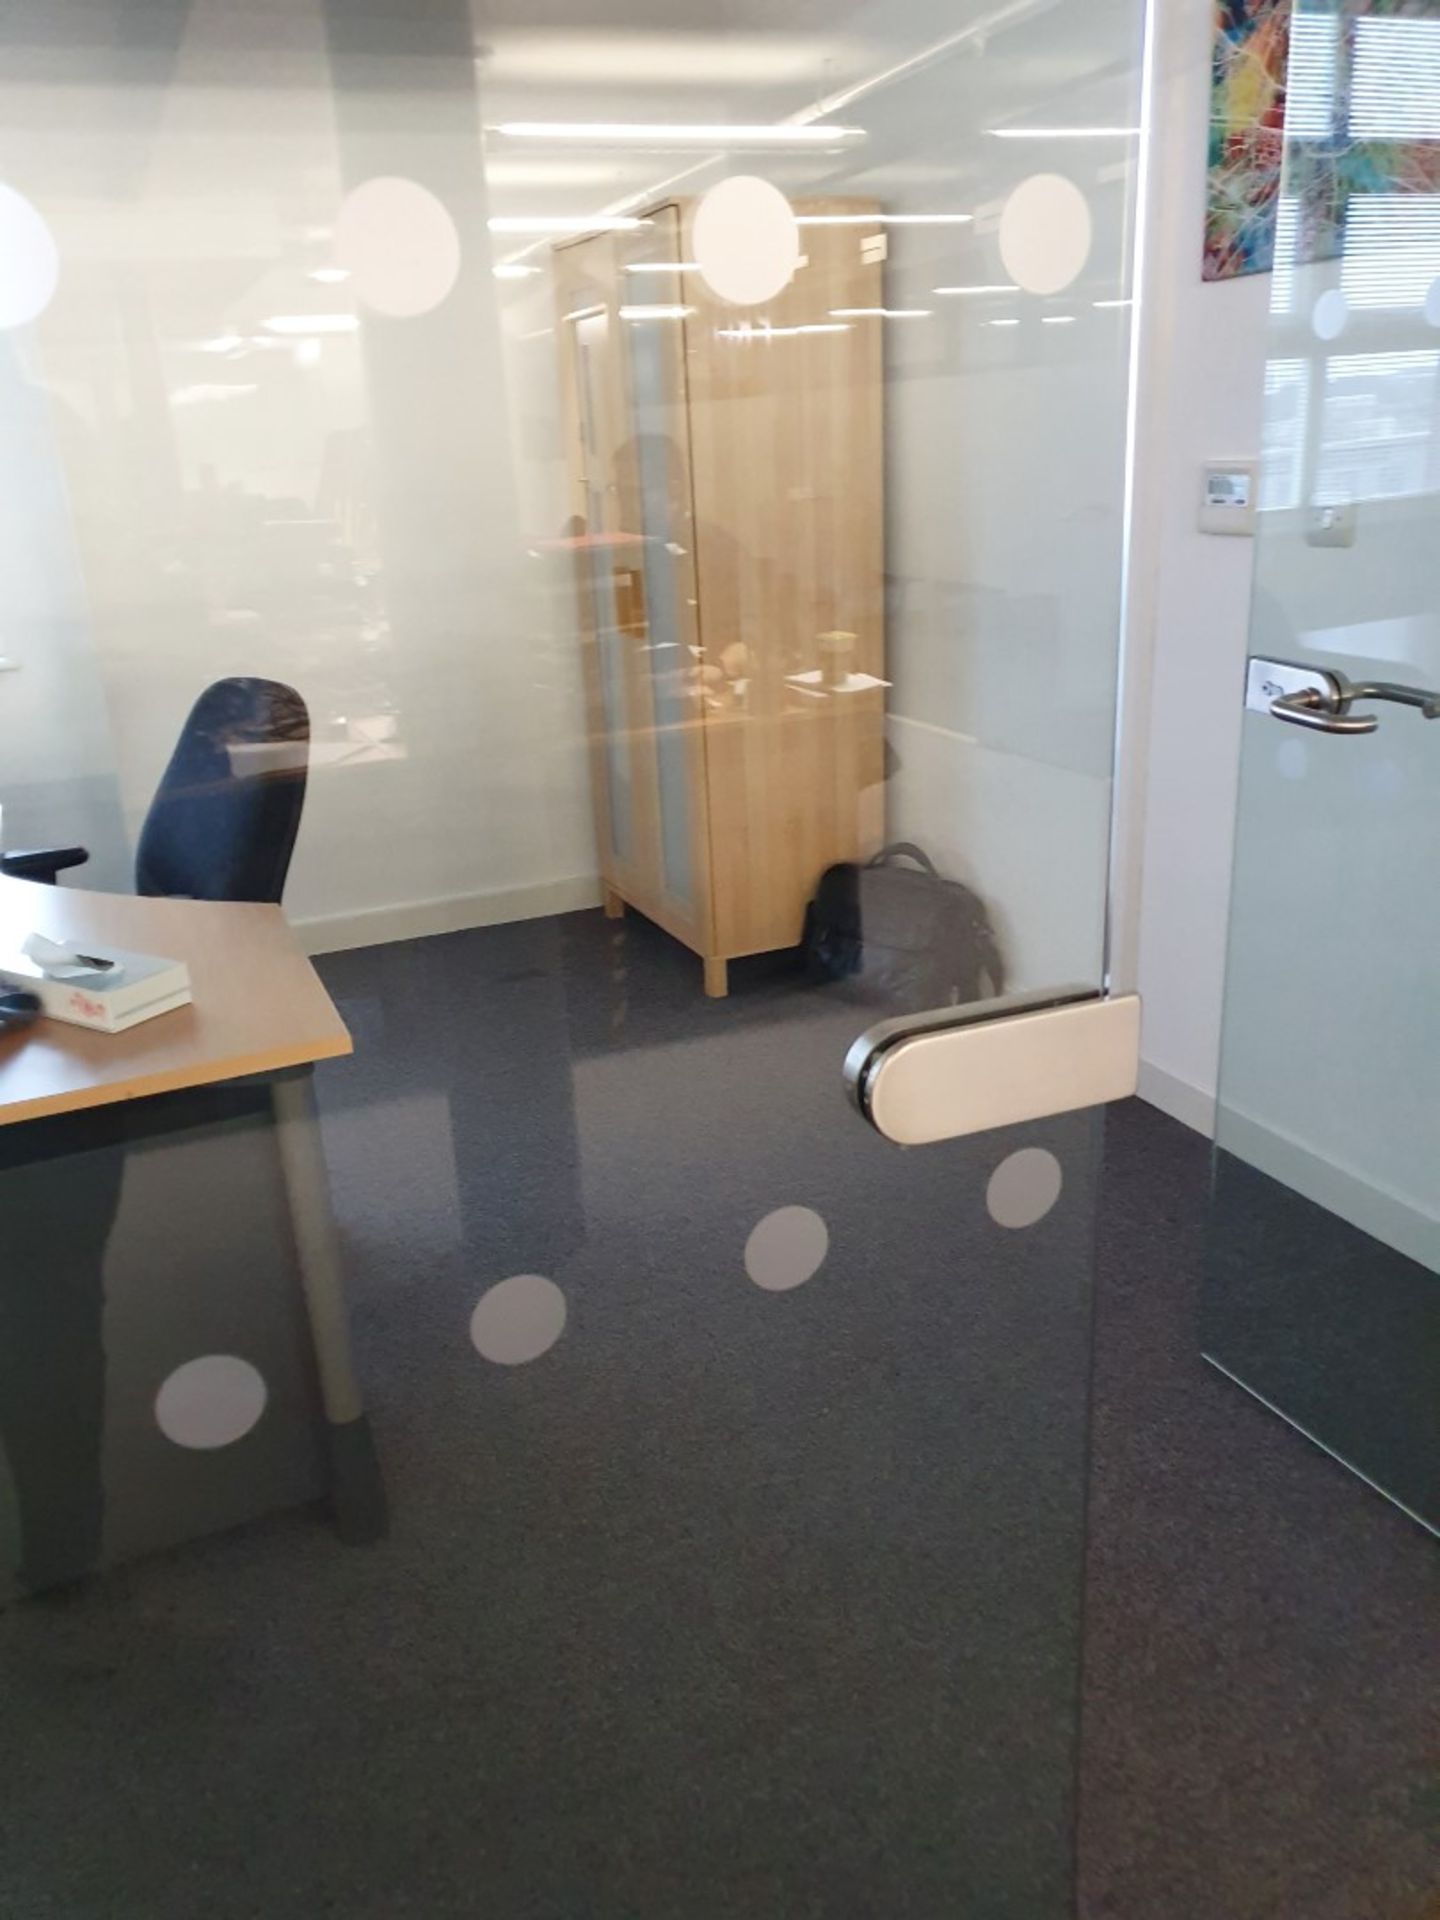 Lot of Office Glass Partition Panels - CL467 - Location: Manchester M12 - Image 3 of 11